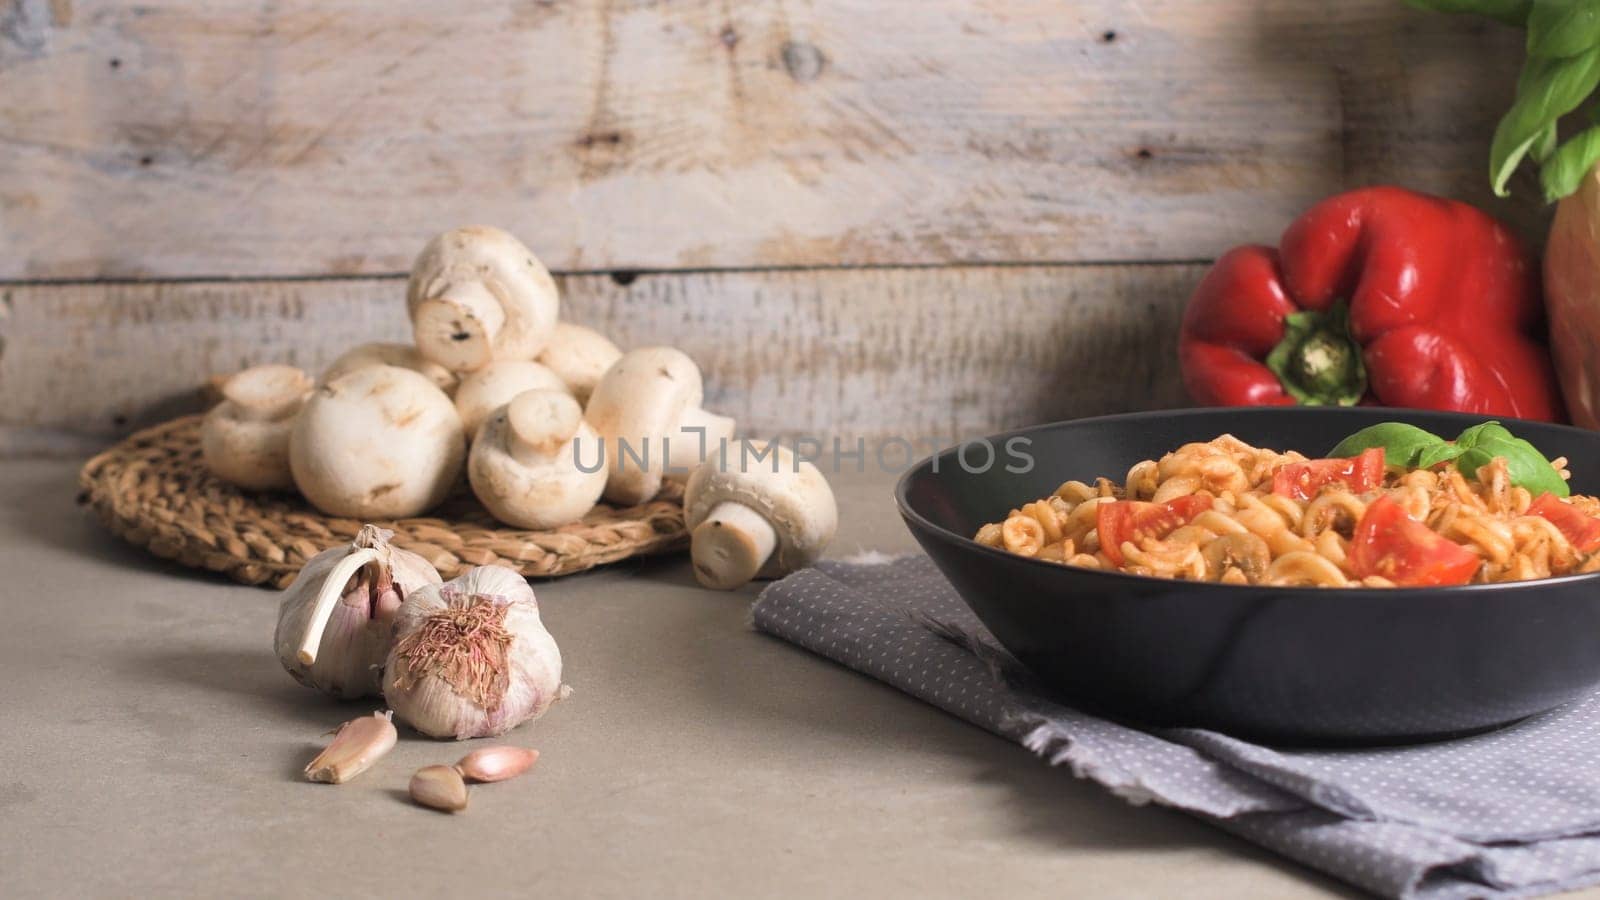 Italian Pasta with Tuna and Basil. Fresh pasta with tuna and tomato sauce on old wooden background.